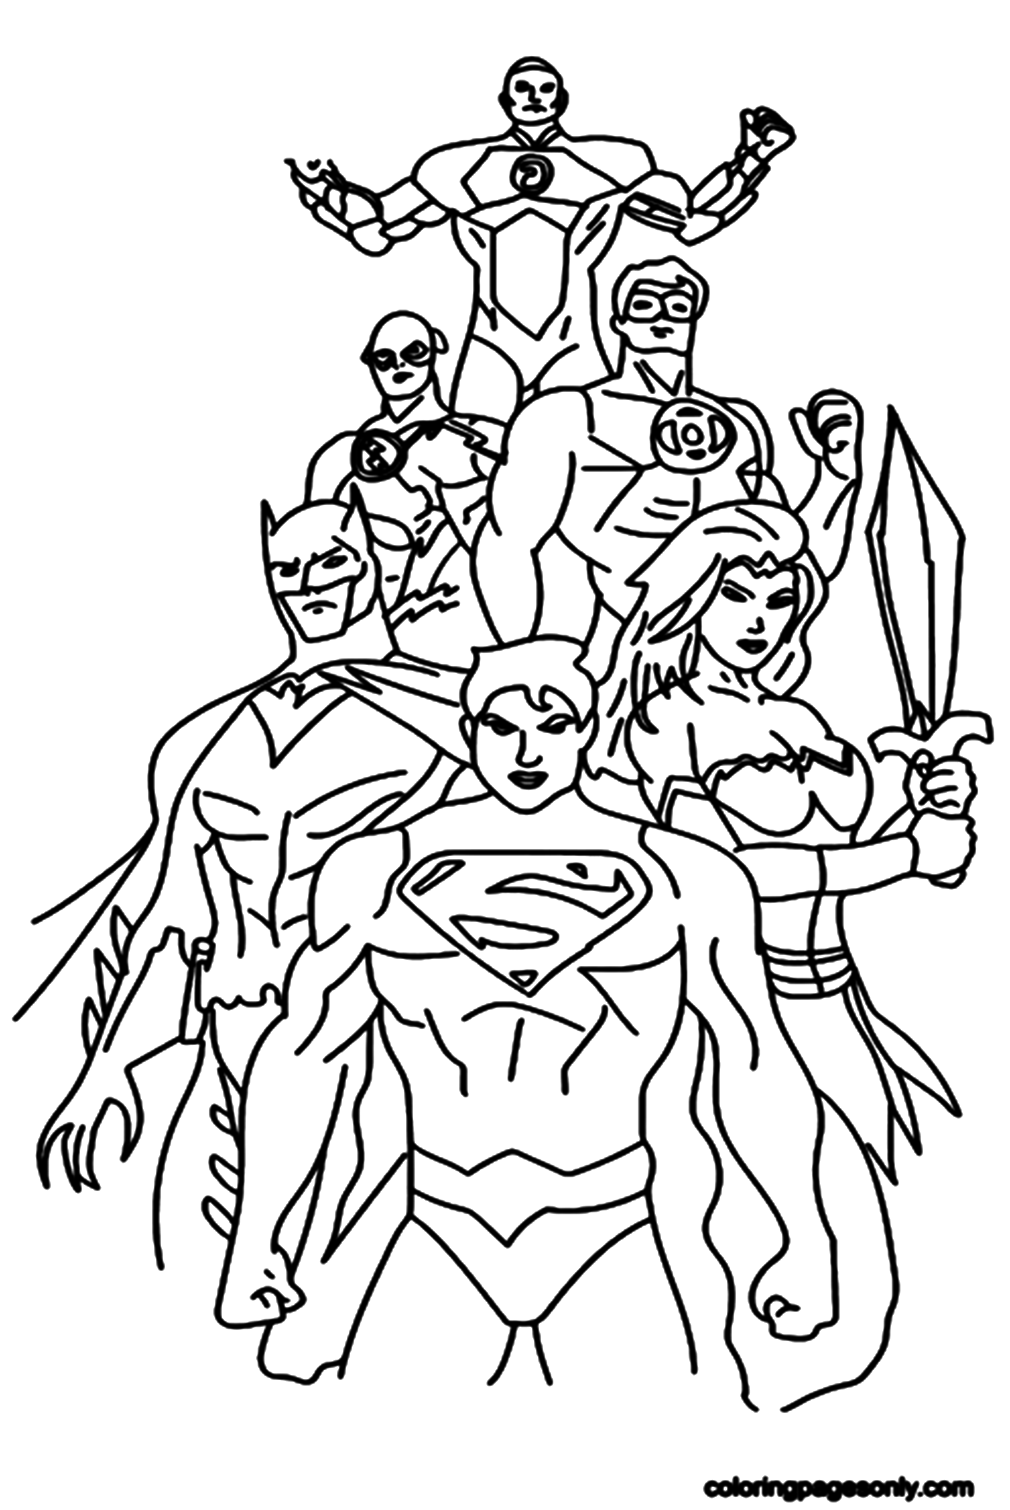 Superman with Gang Coloring Pages